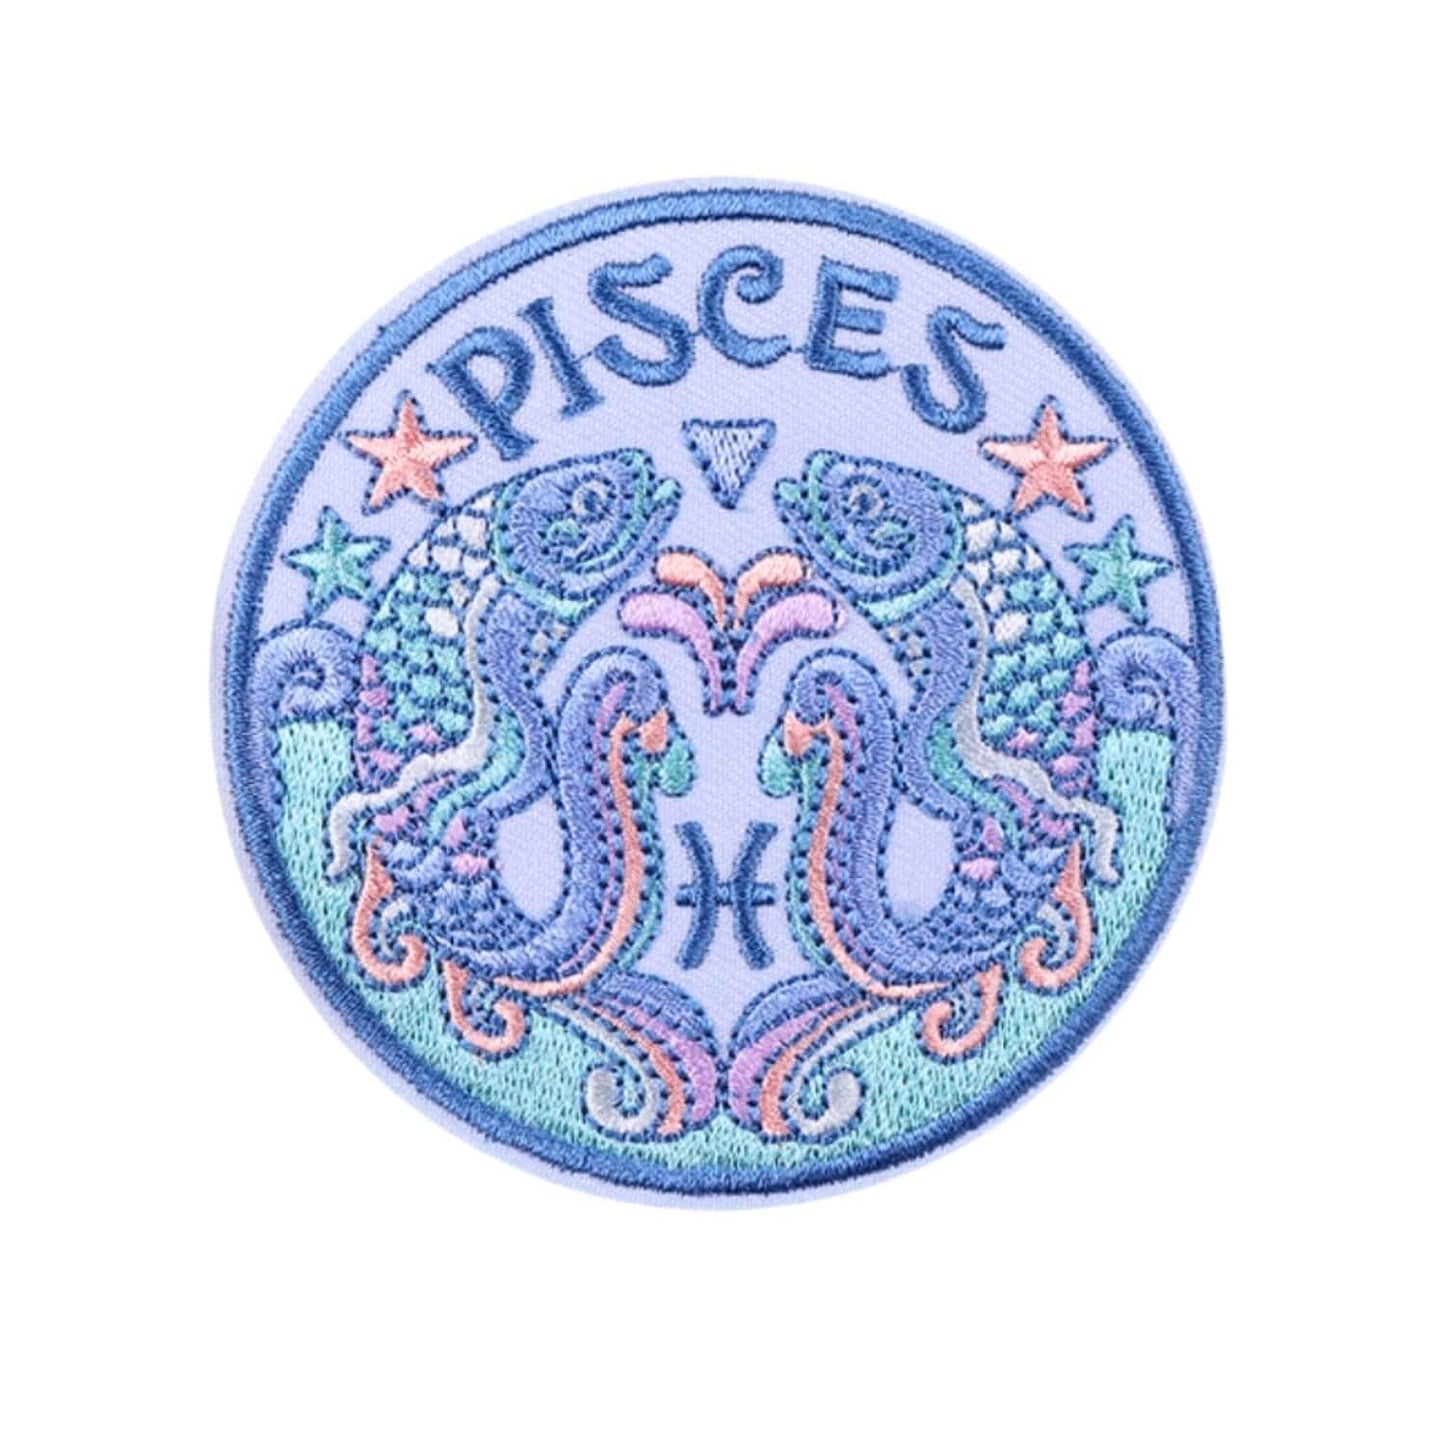 Sunday Forever Decor NEW! Embroidered Zodiac Patches